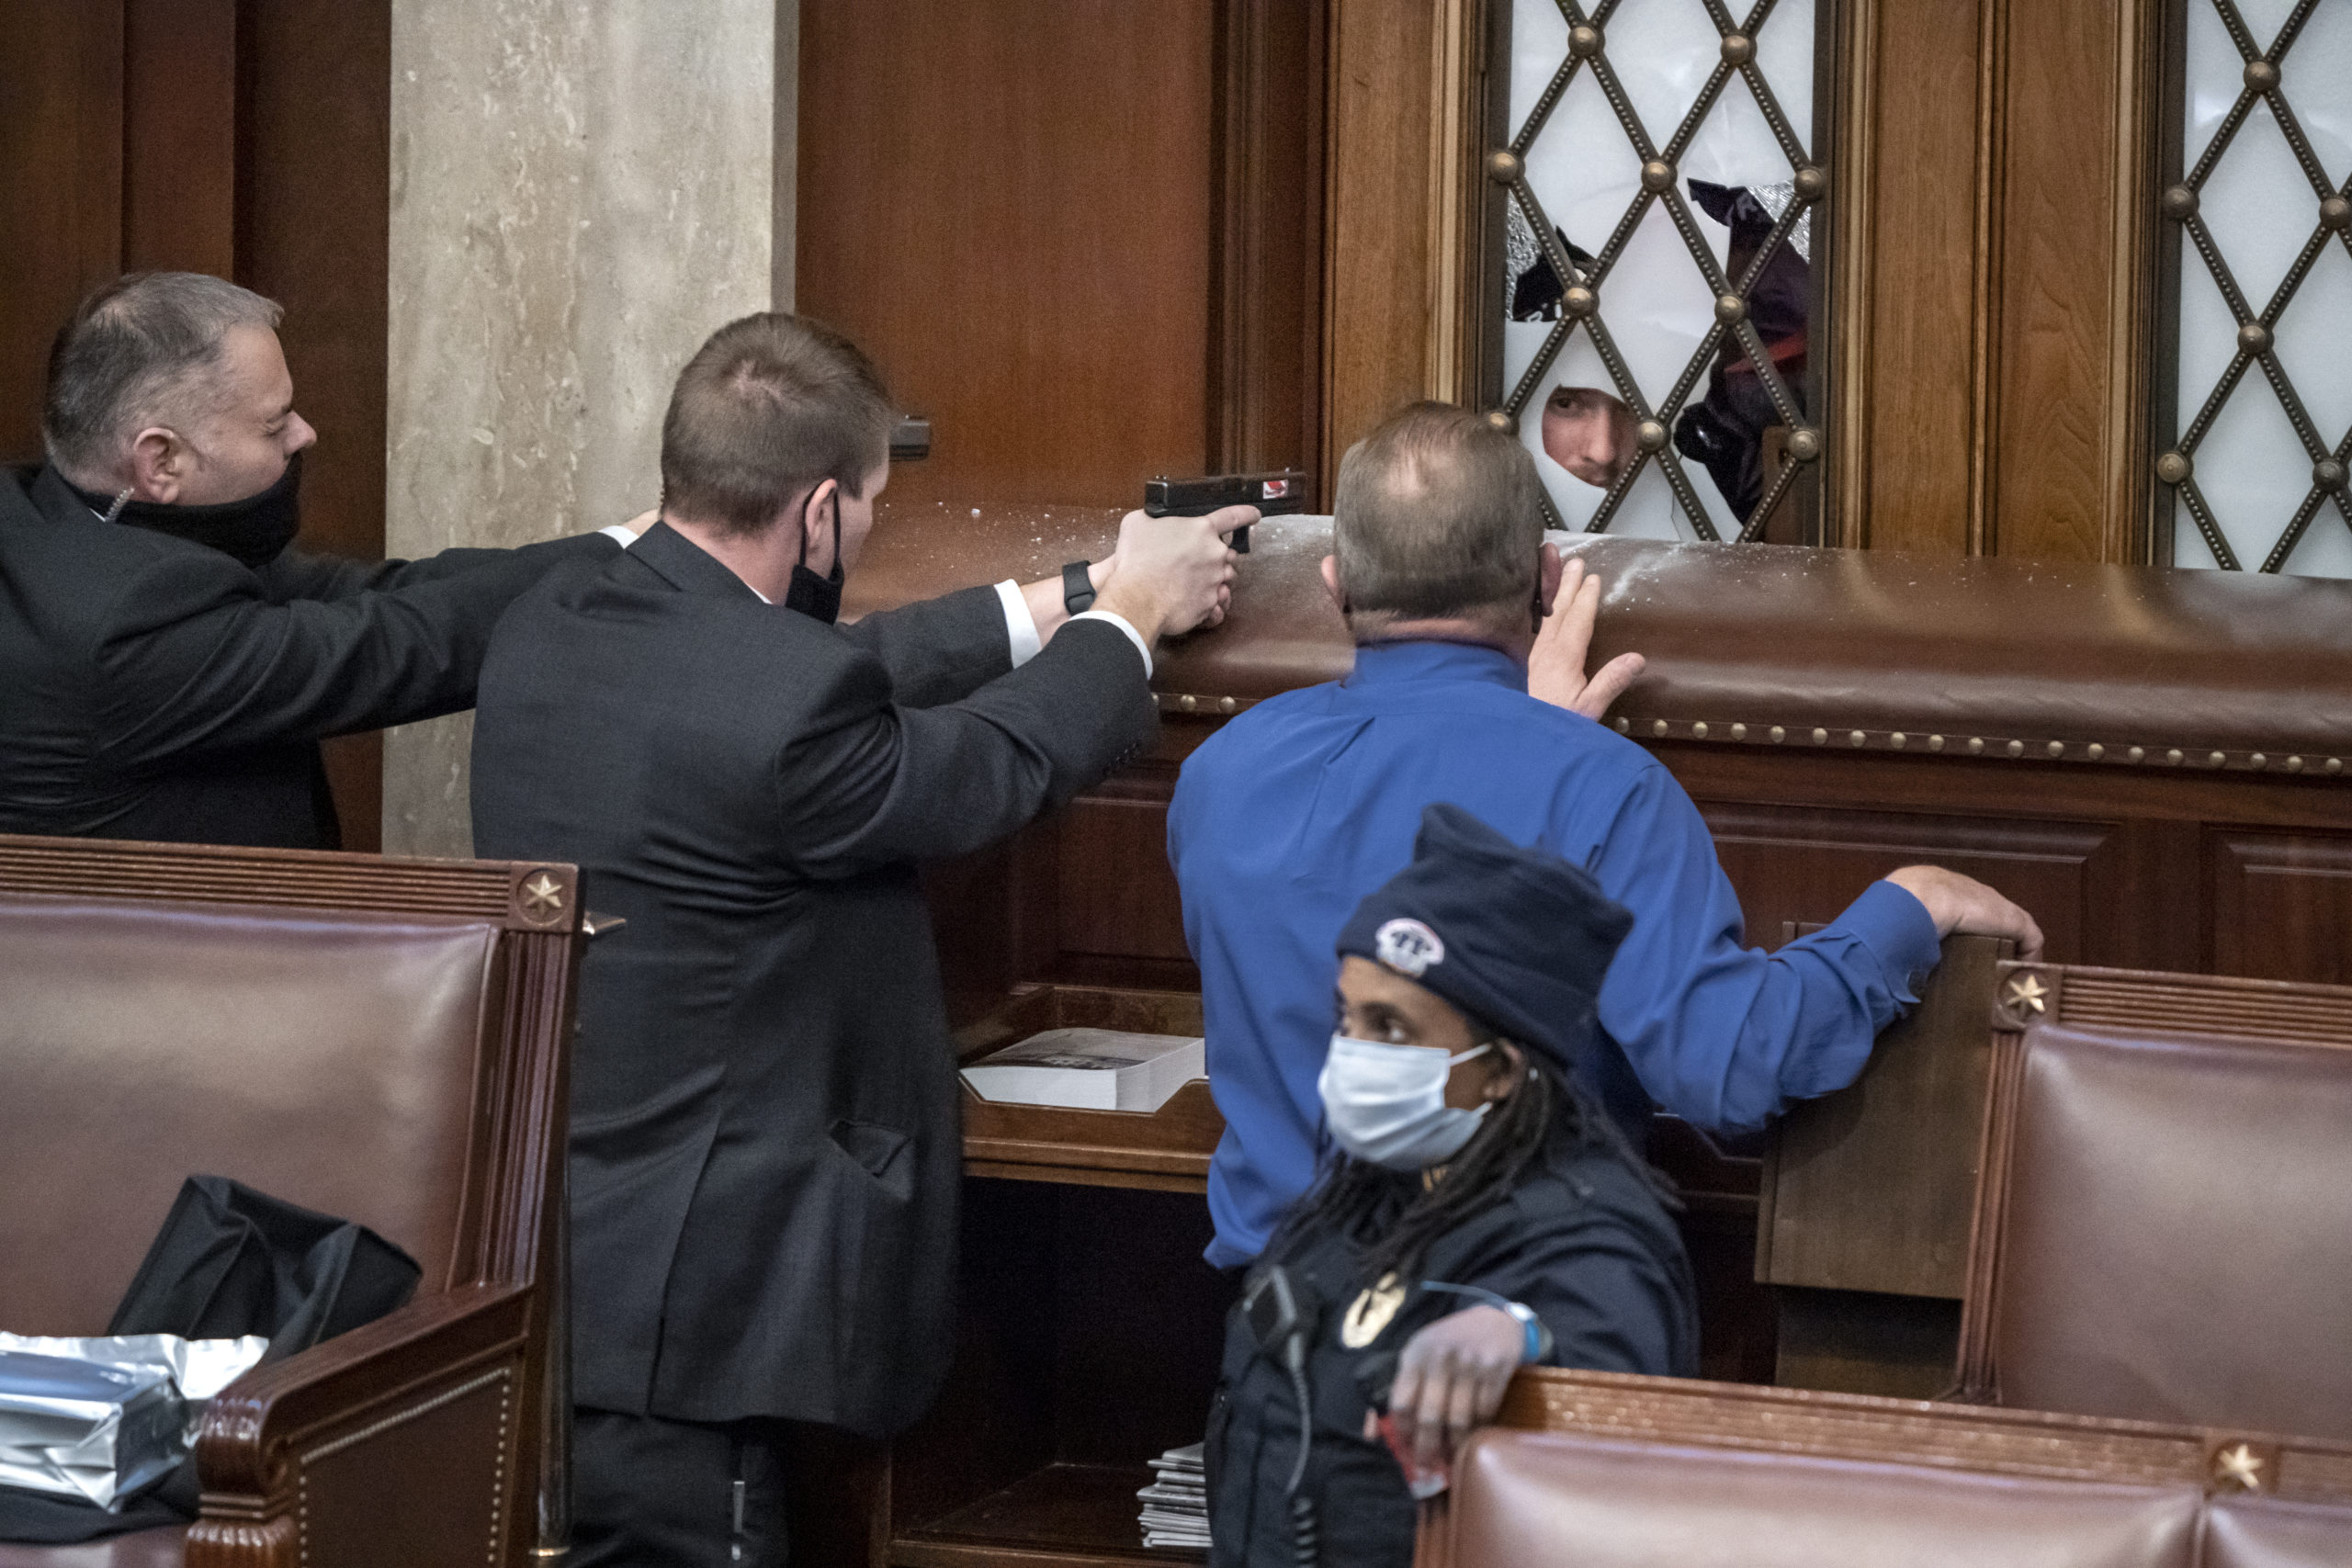 FILE - U.S. Capitol Police agents aim their guns as a pro-Trump mob tries to break into the House of Representatives chamber trying to stop the certification of President-elect Joe Biden's electoral college win, at the Capitol in Washington, Wednesday, Jan. 6, 2021. Rep. Troy Nehls, R-Texas, in blue shirt, talks to one of the rioters. (AP Photo/J. Scott Applewhite, FILE)